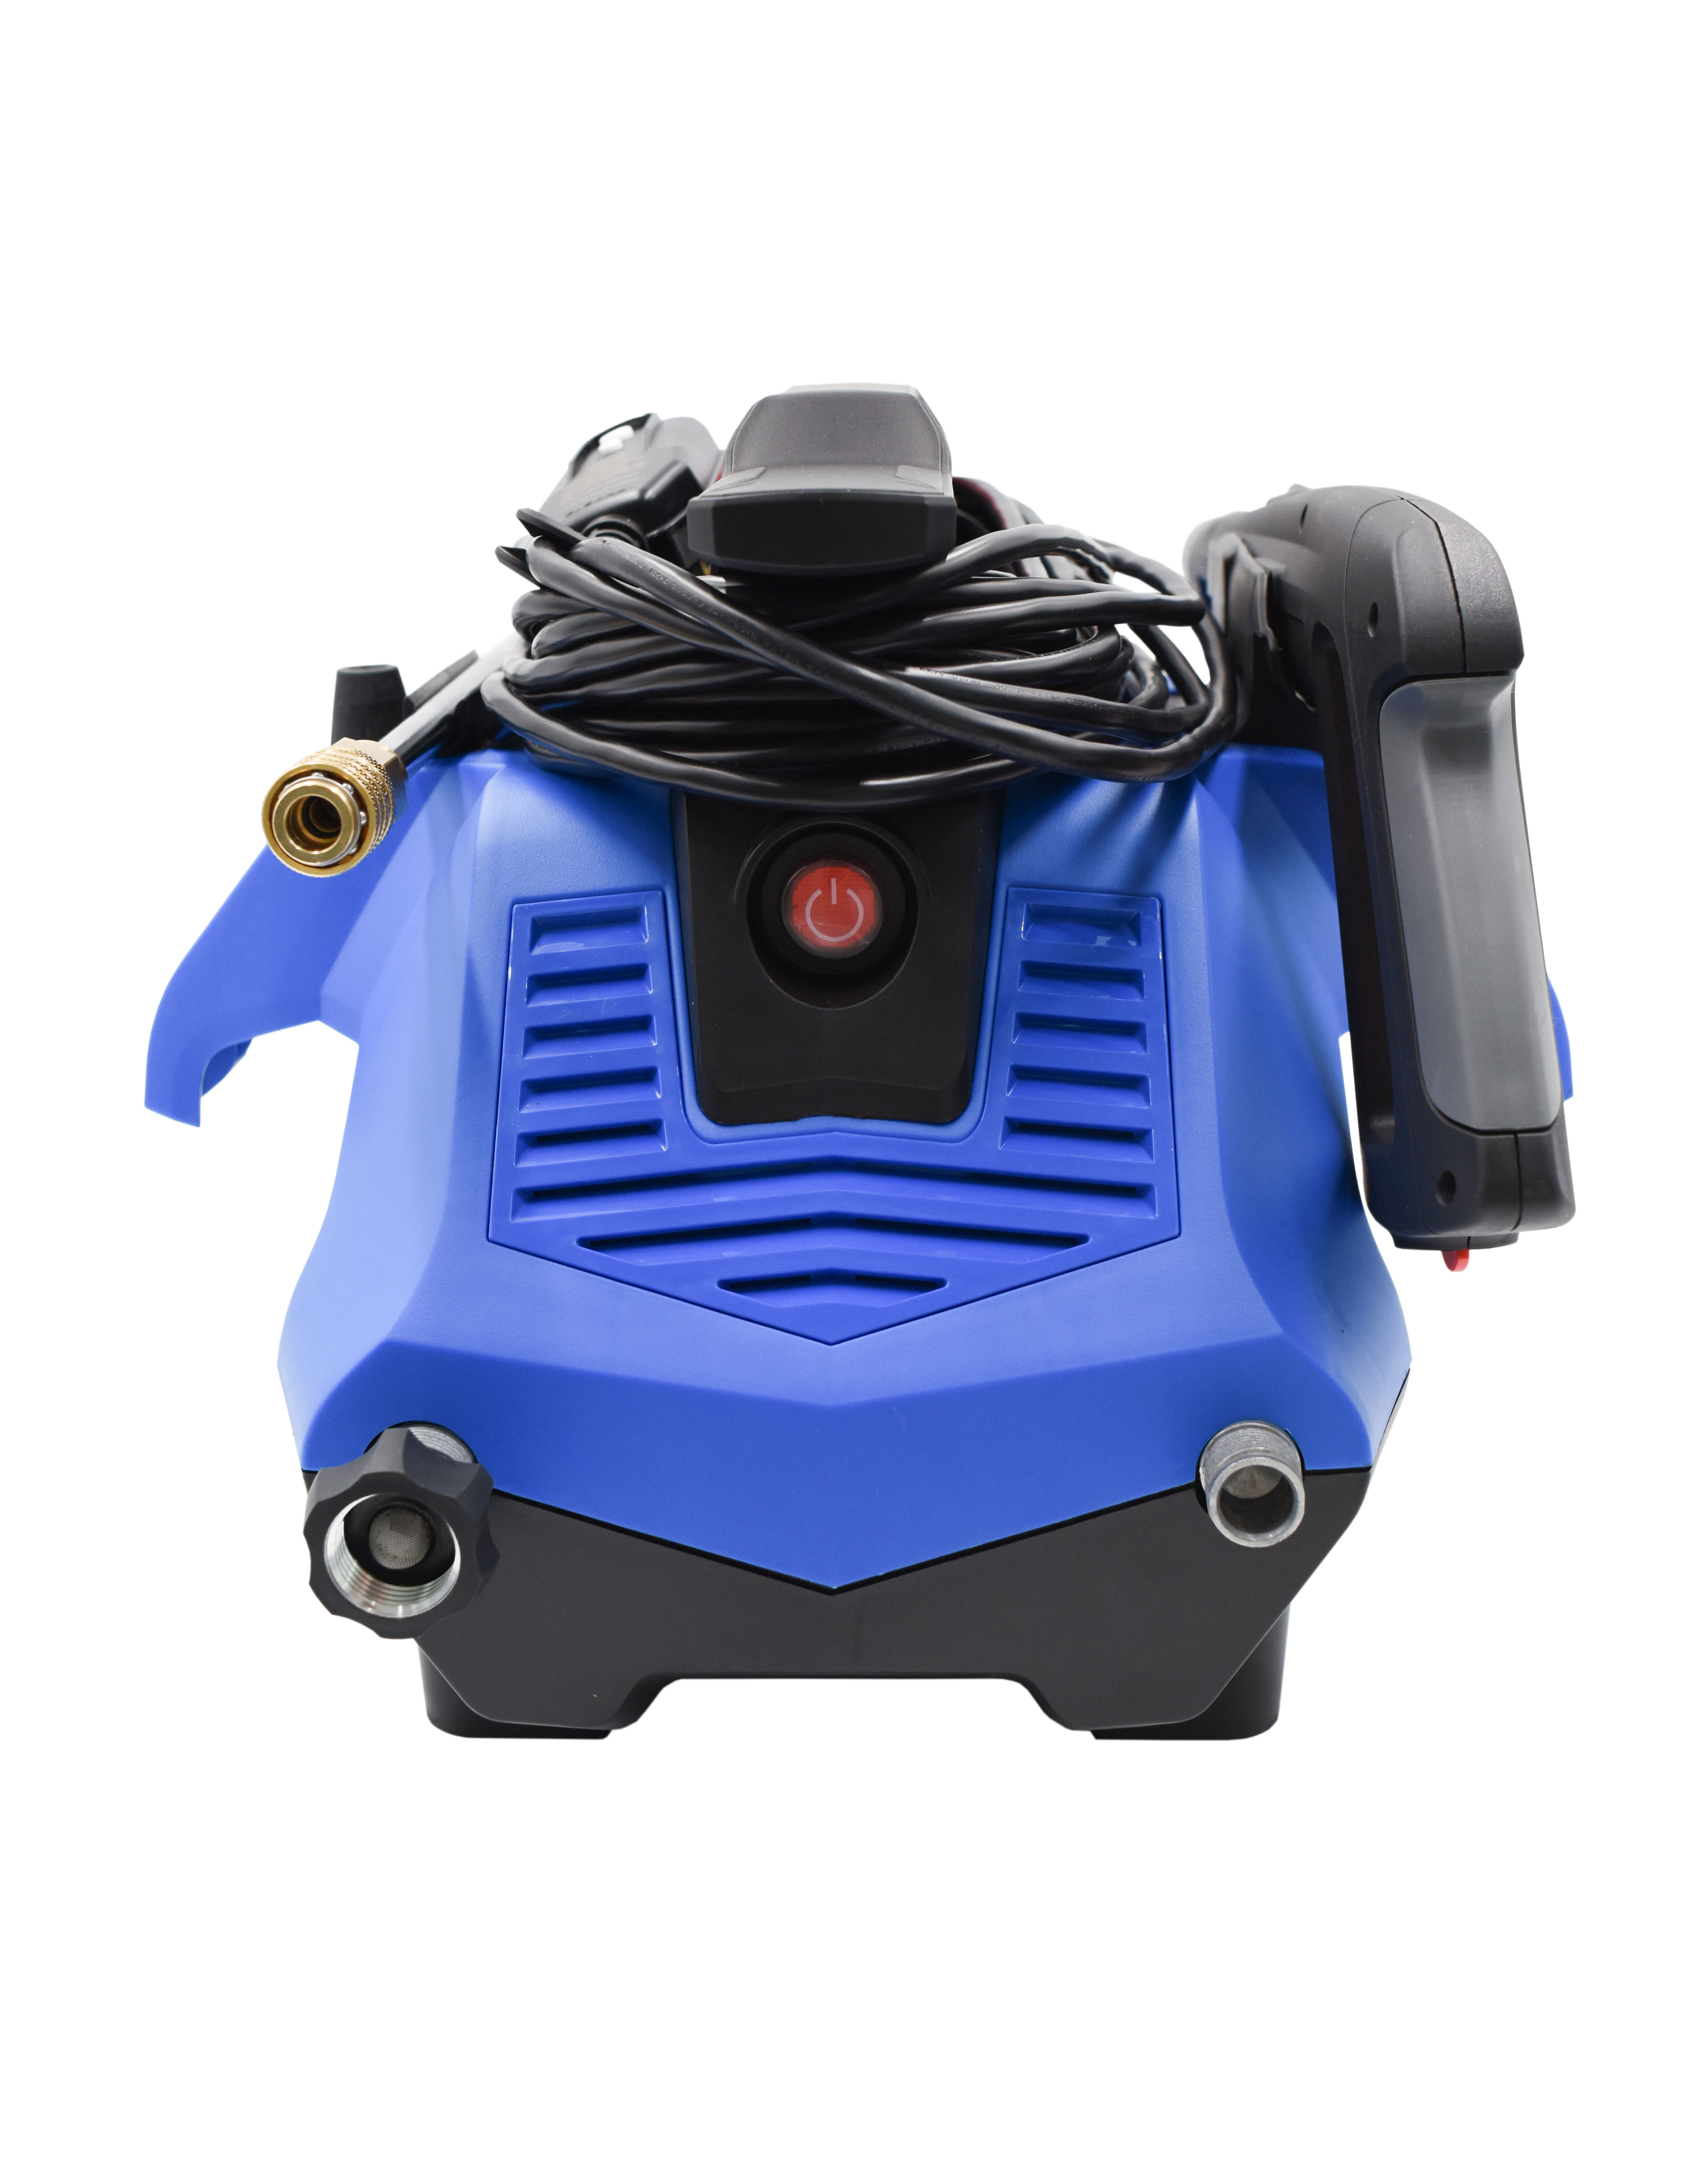 for Washing Cars 1.7 GPM AR Blue Clean BC2N1HSS New Electric Pressure Washer 2300 PSI New & Improved and Siding Fences Decks 